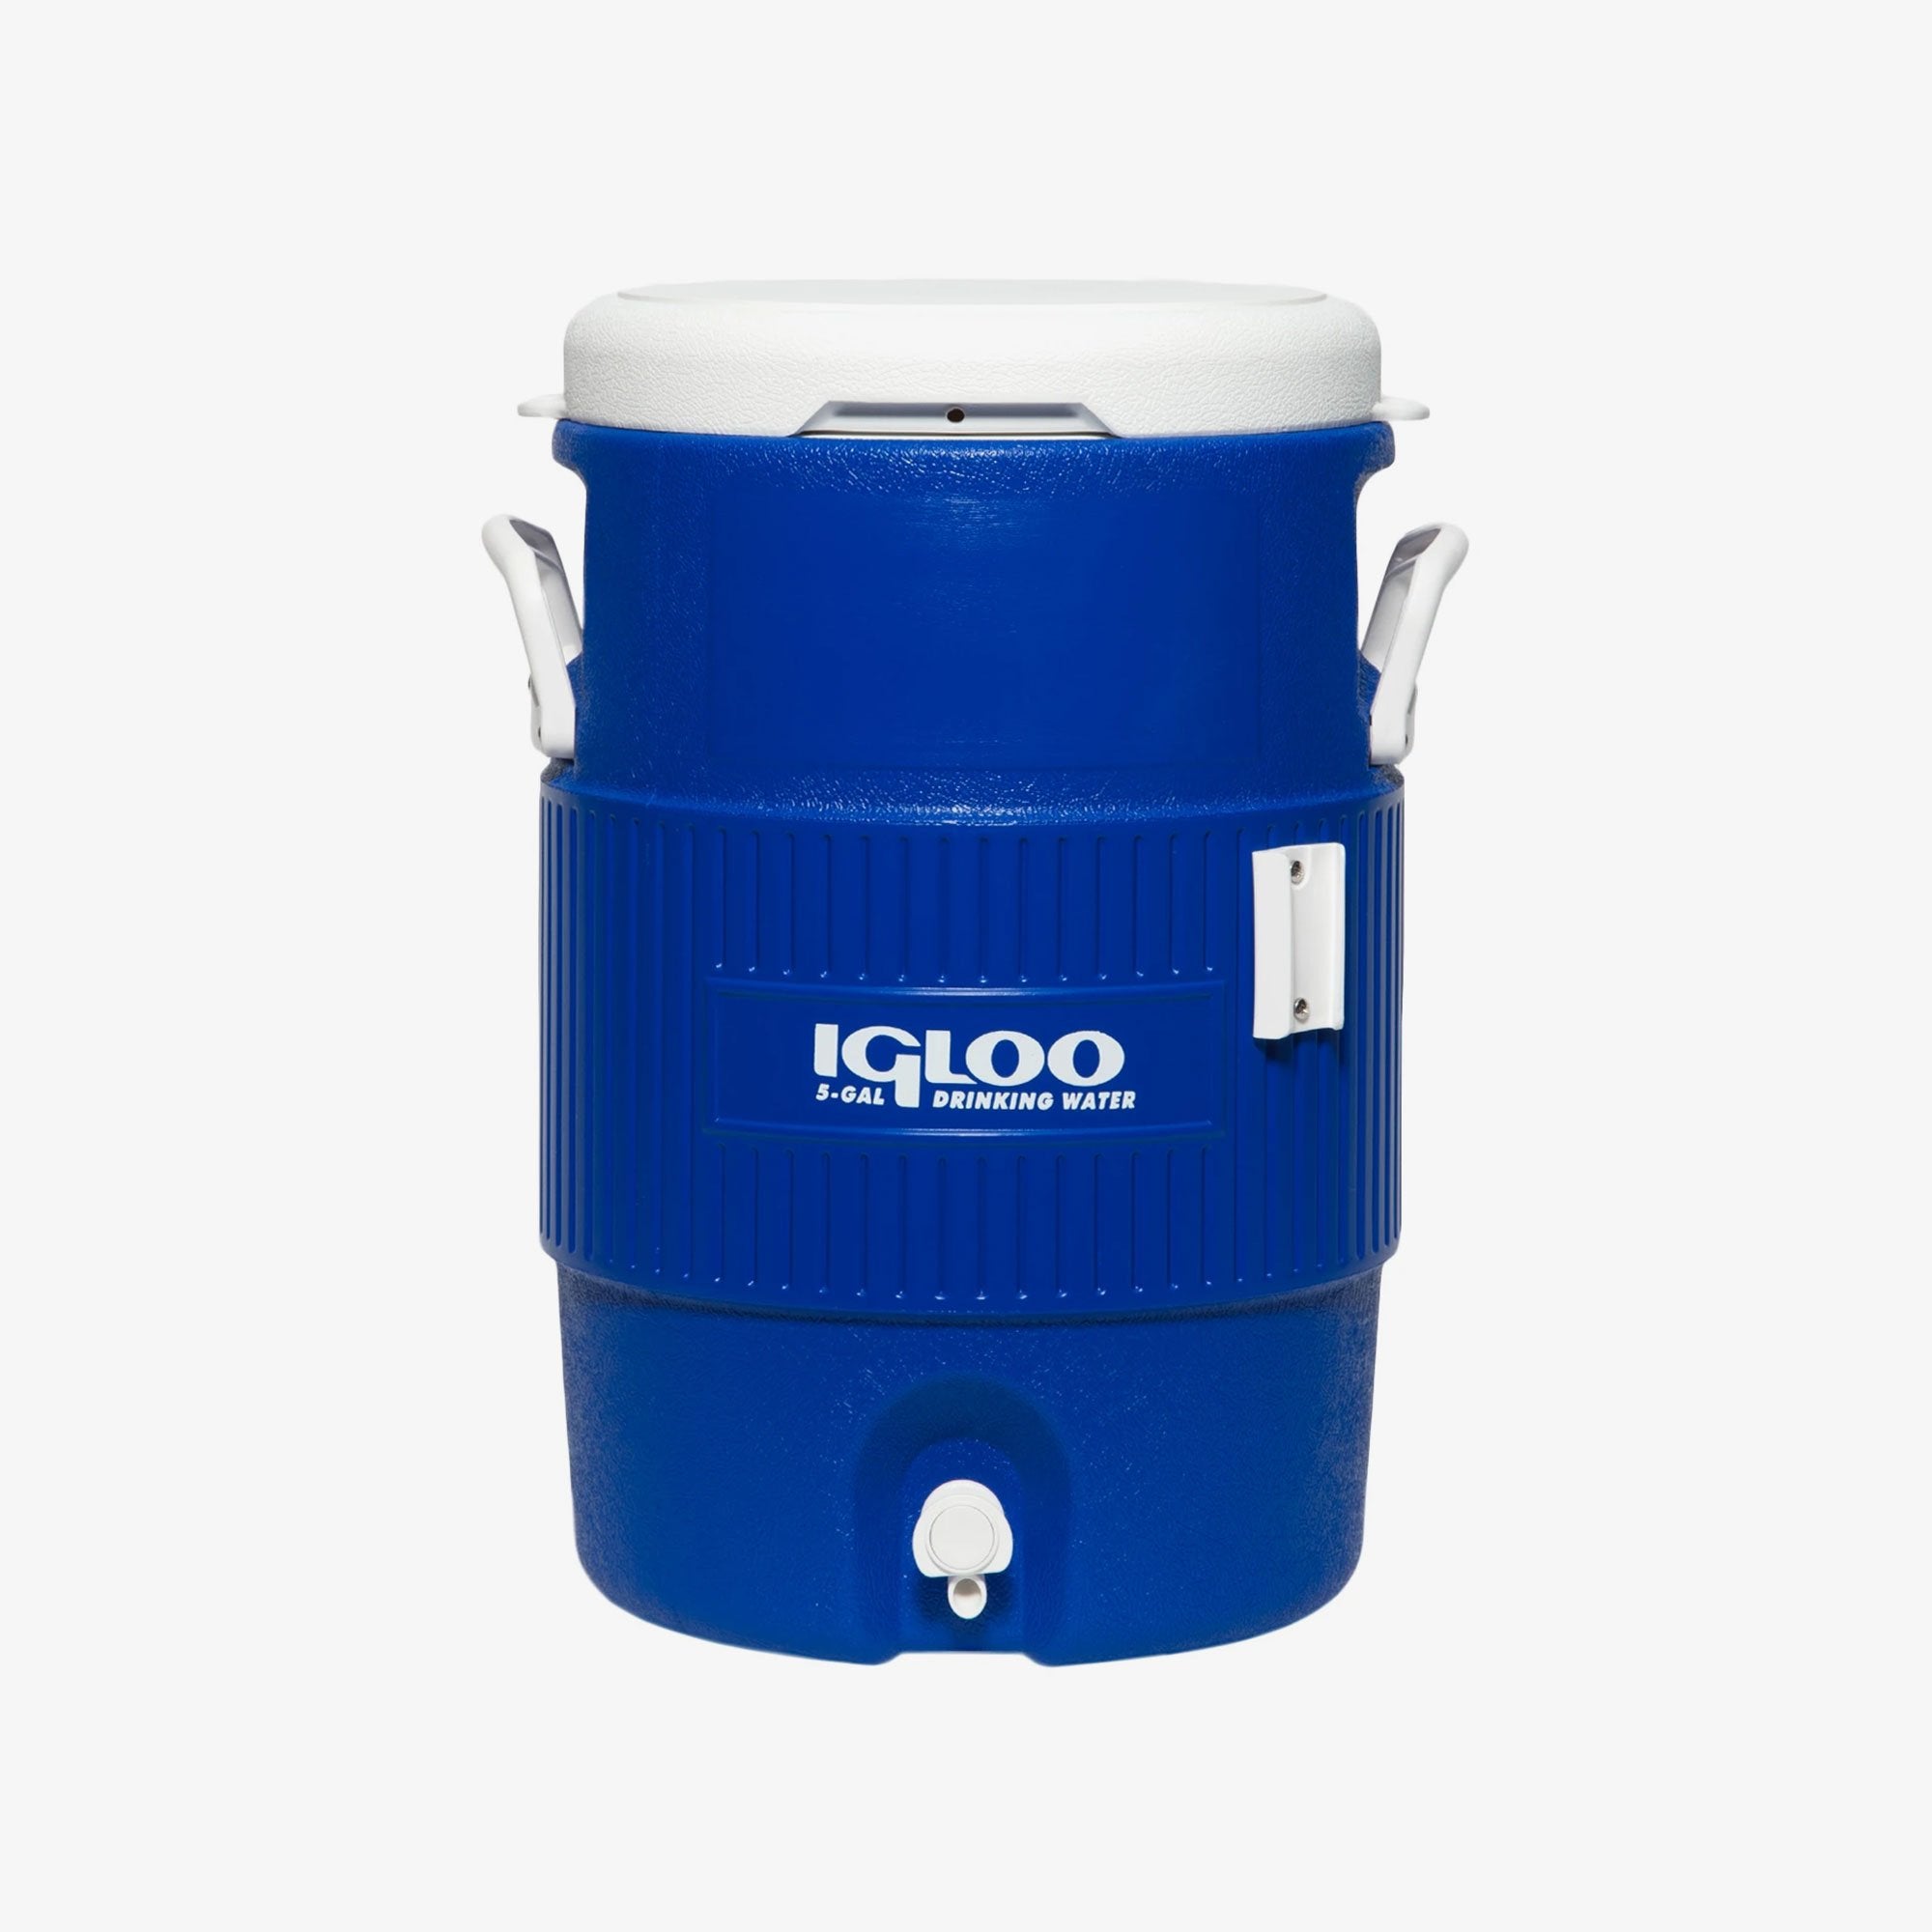 Party Size Bag - 5 Gallons